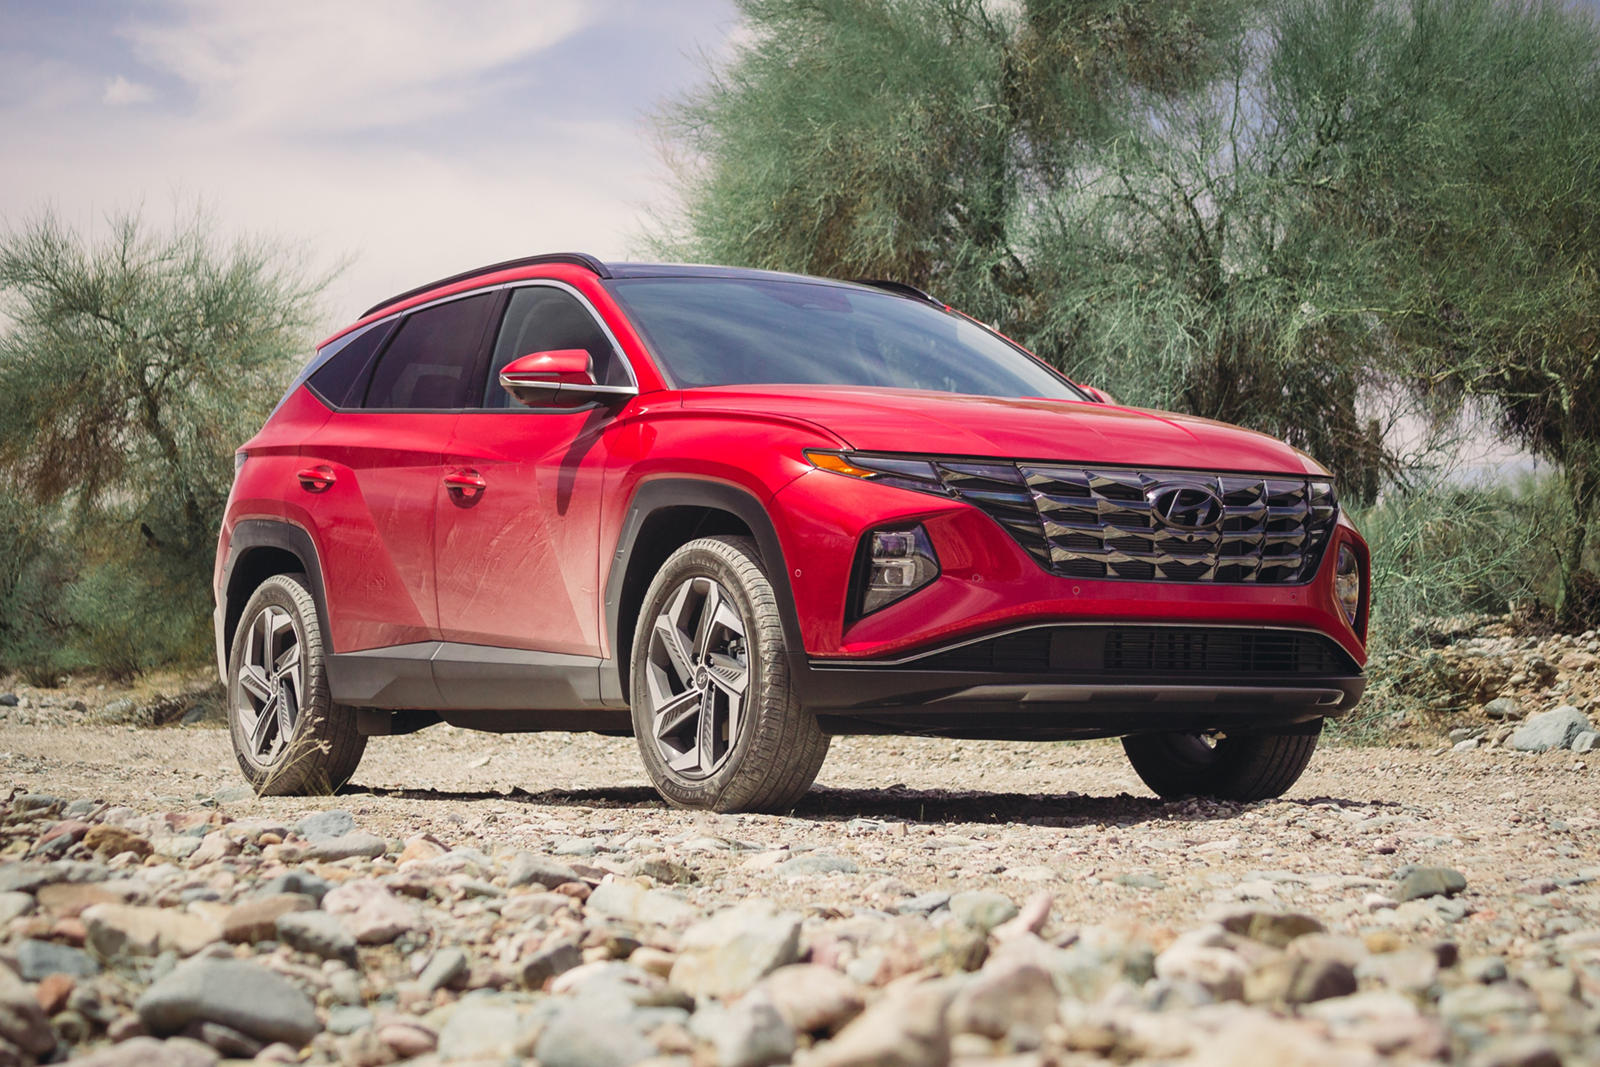 What's New On The 2023 Hyundai Tucson? Here's What You Need to Know